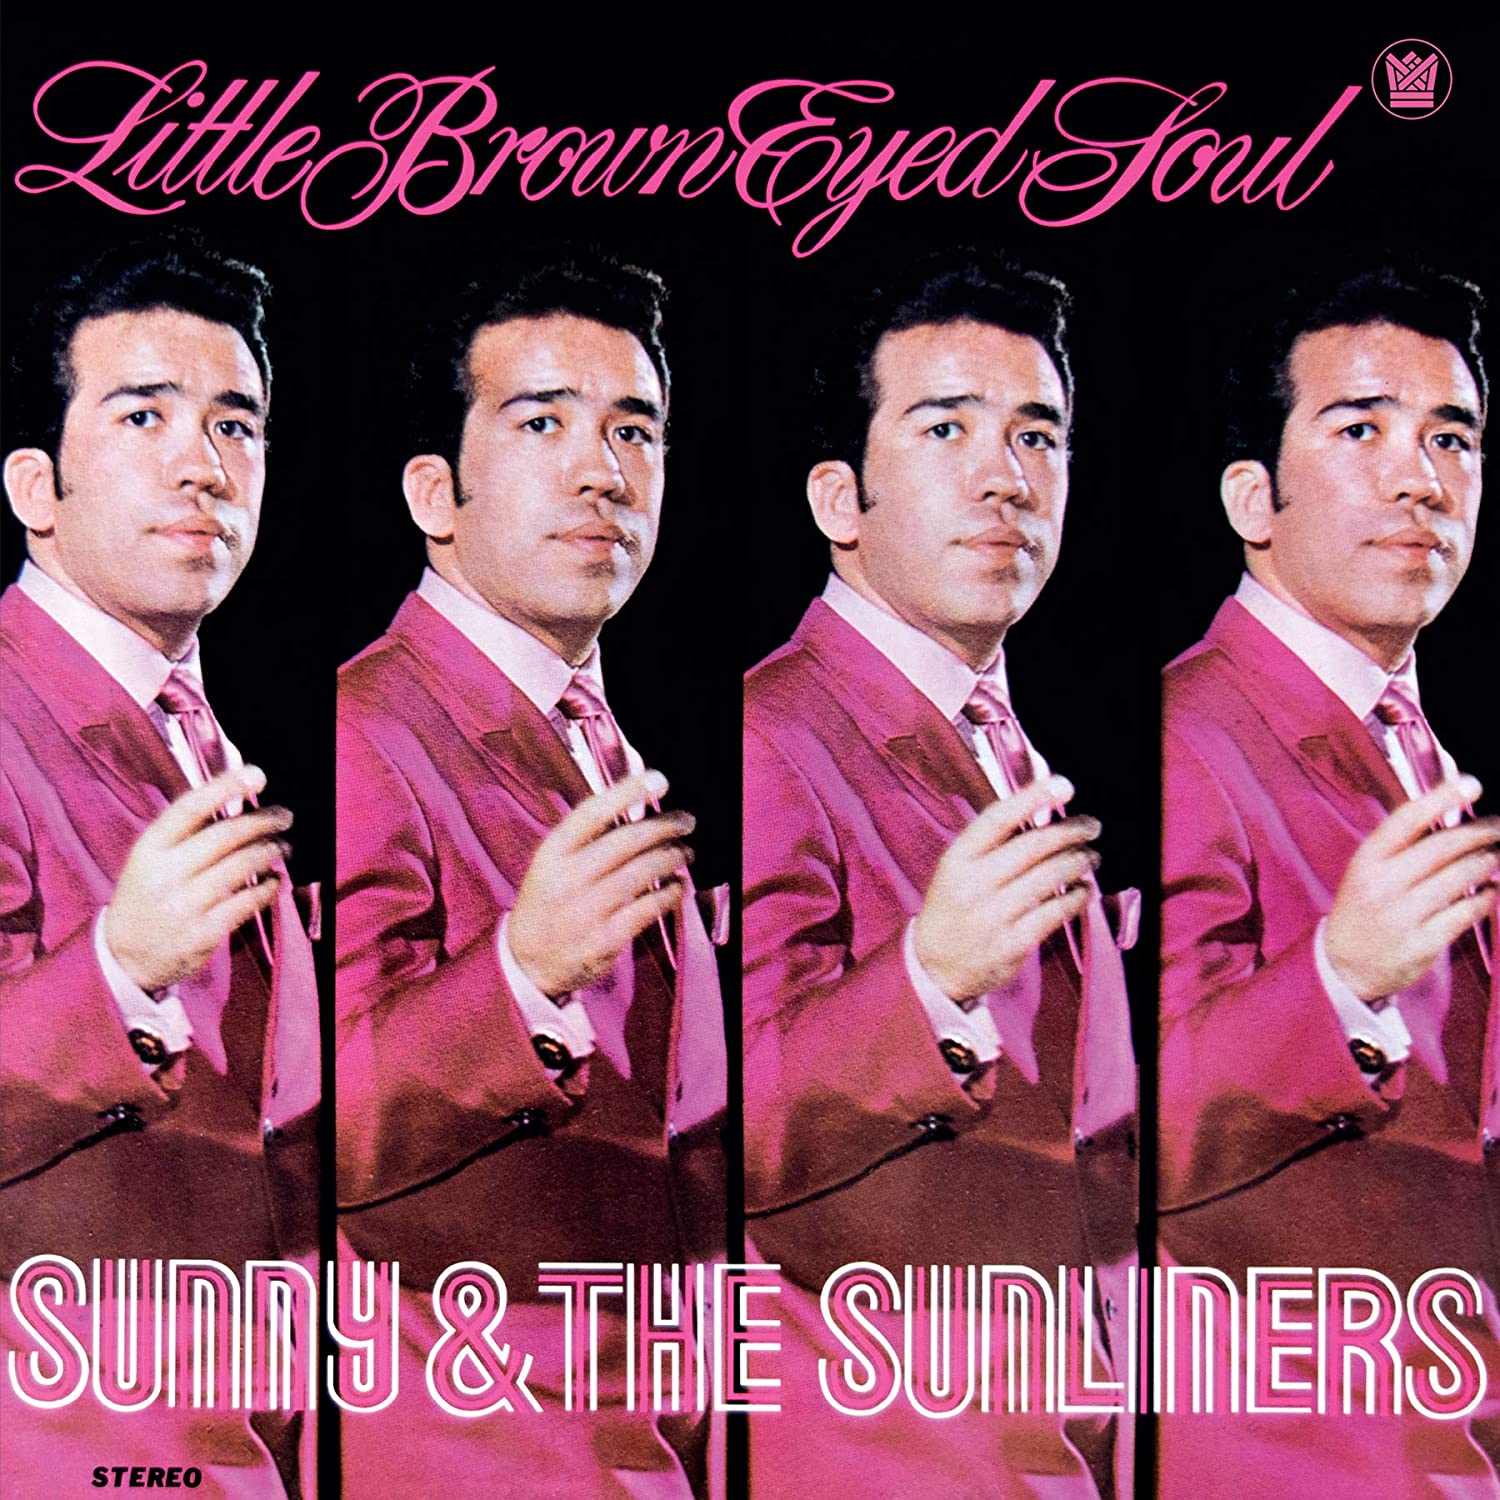 Sunny & The Sunliners (써니 앤 썬라이너스) - Little Brown Eyed Soul [LP] 